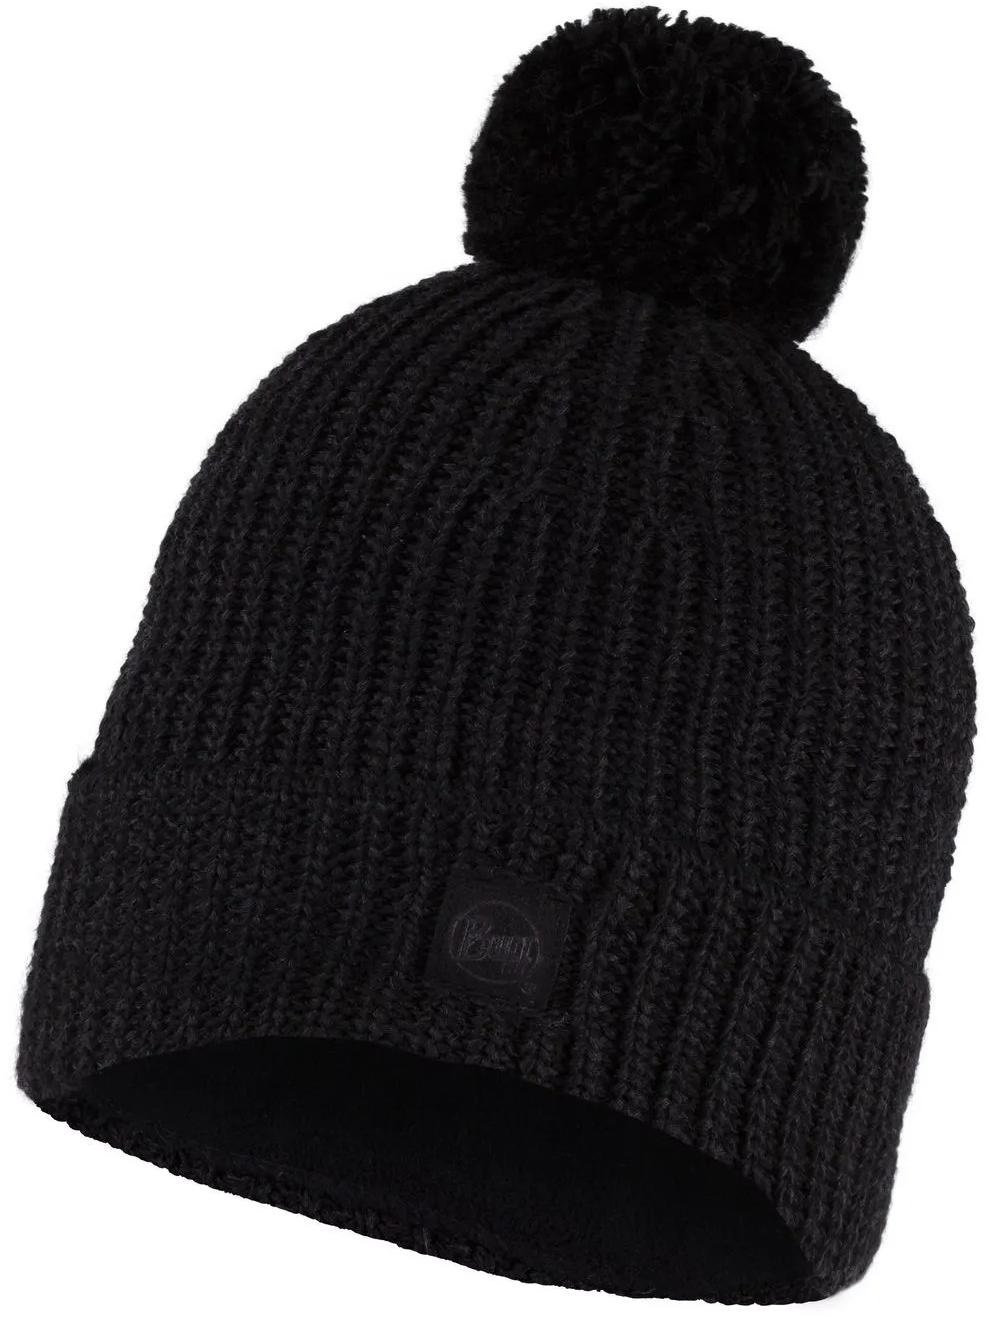 Шапка Buff Knitted & Fleece Band Hat Vaed Black, US:one size, 129619.999.10.00 шапка buff knitted hat elon ash us one size 126464 914 10 00